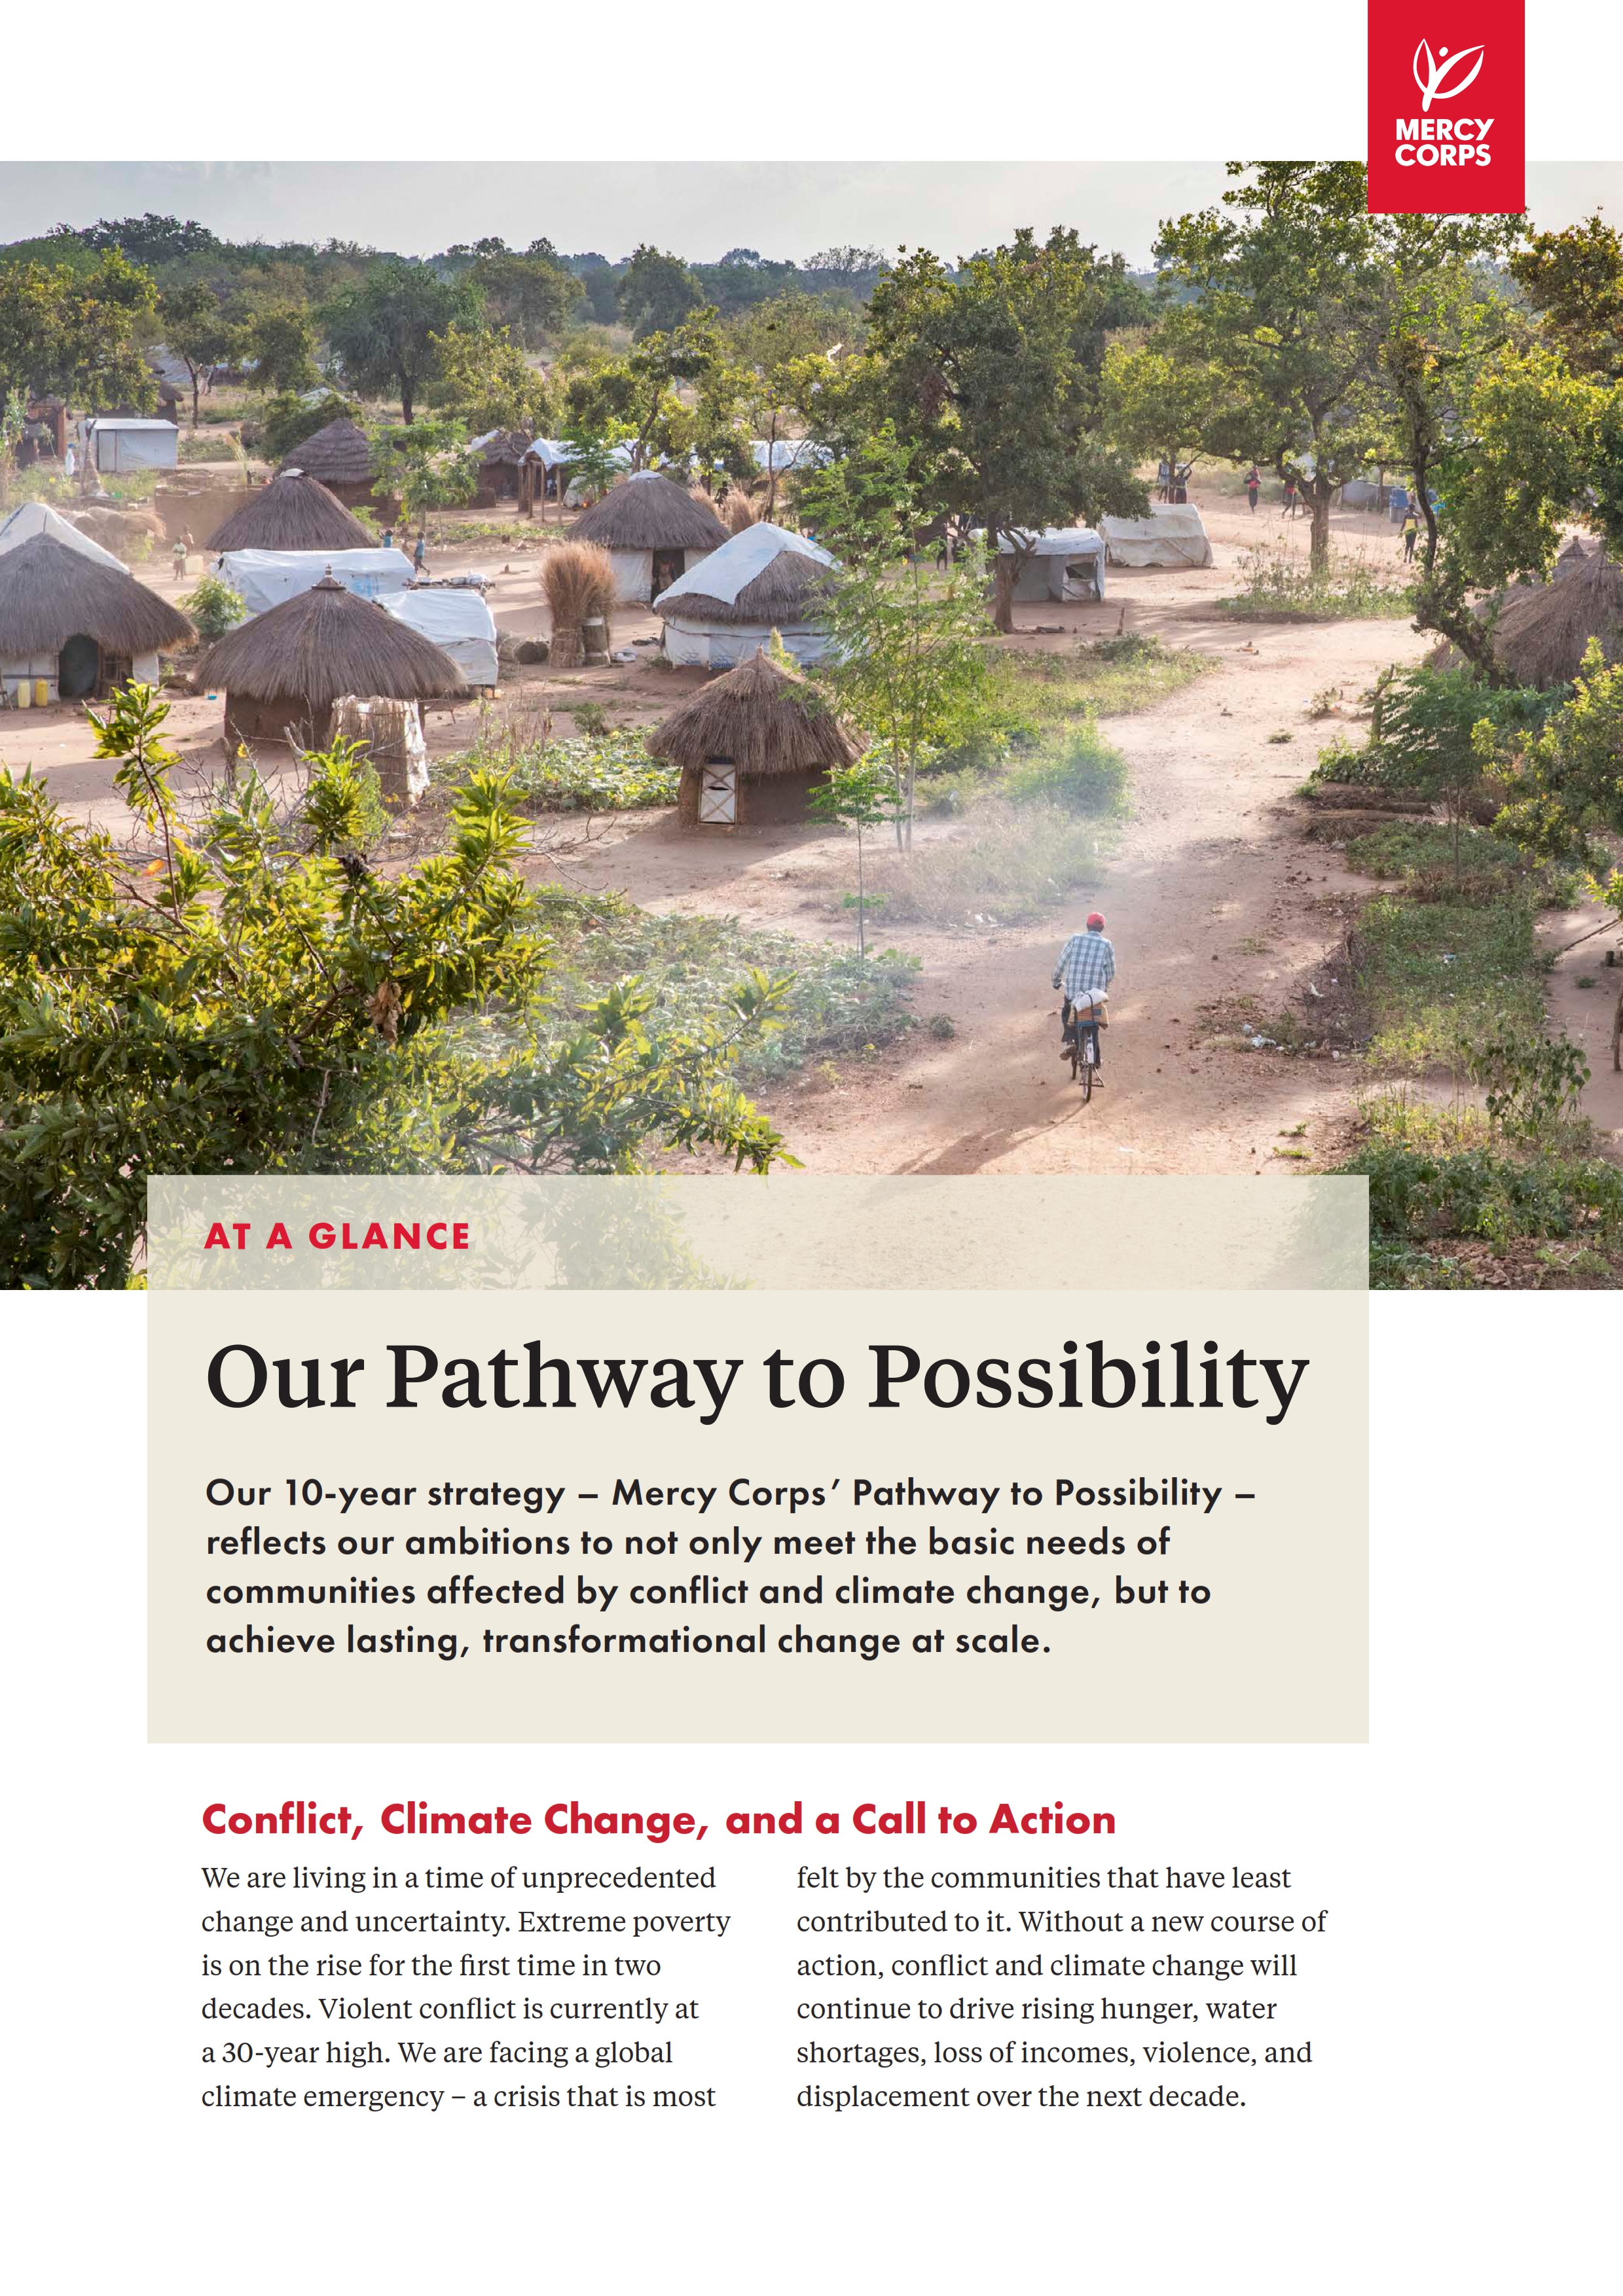 Pathway to Possibility at a Glance